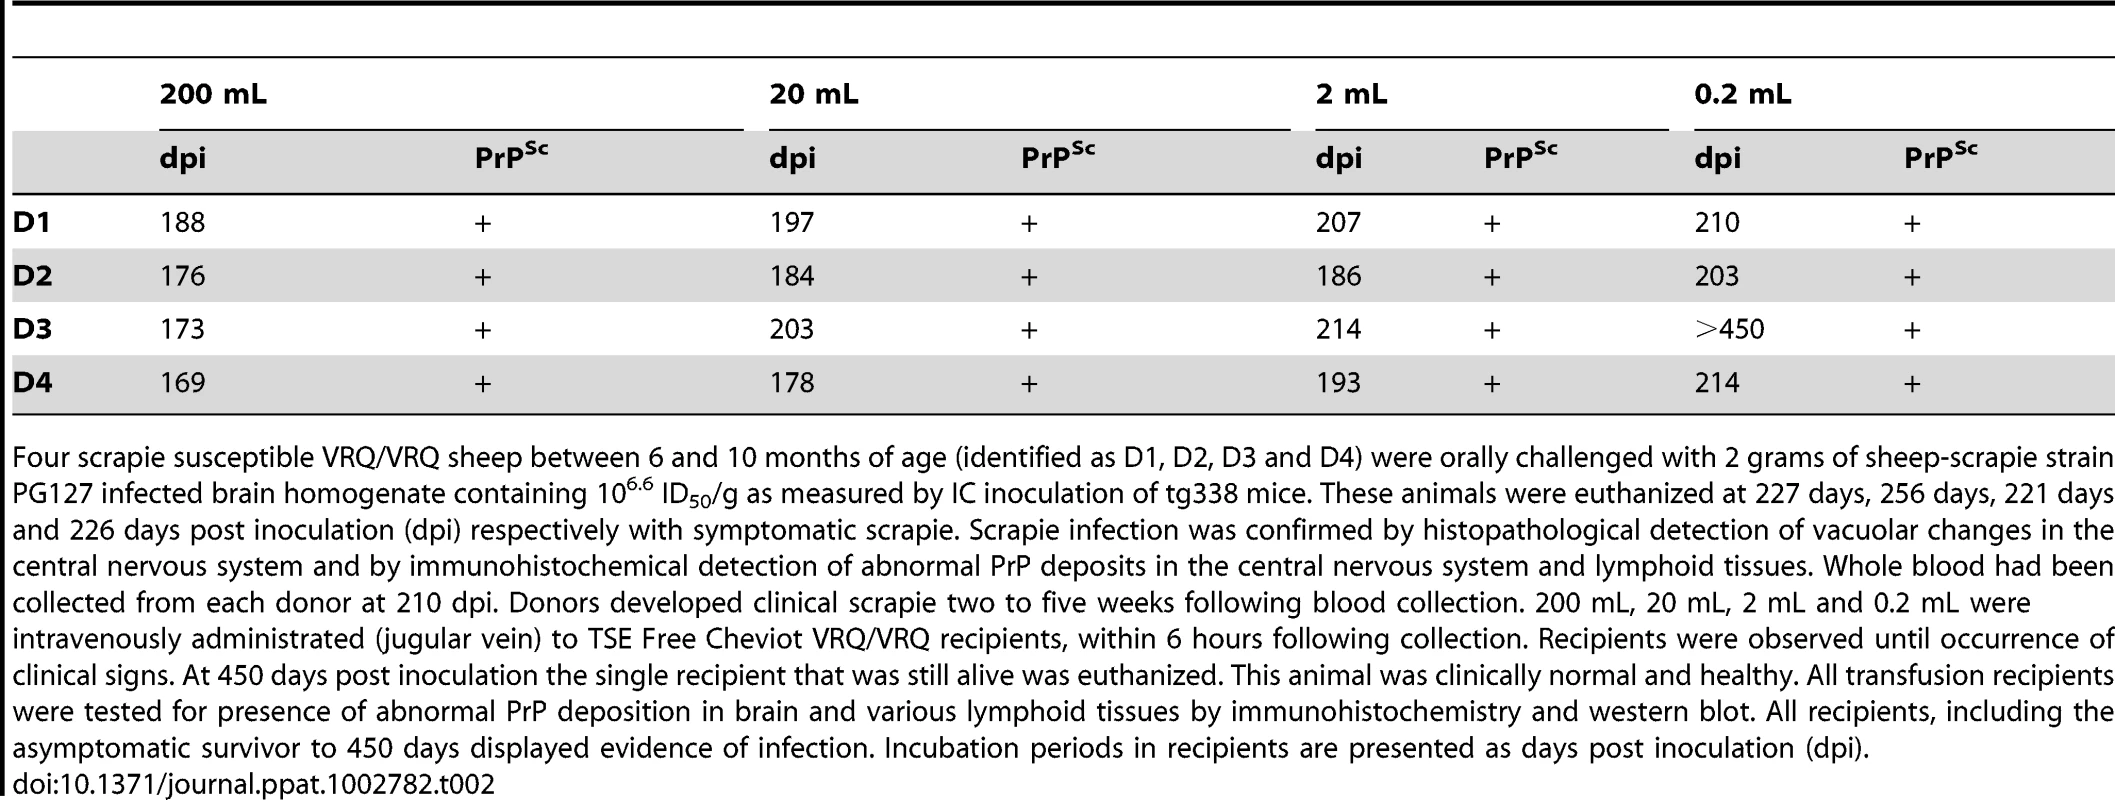 Titration of whole blood from PG127 scrapie infected sheep by transfusion into VRQ/VRQ TSE-free recipient sheep.